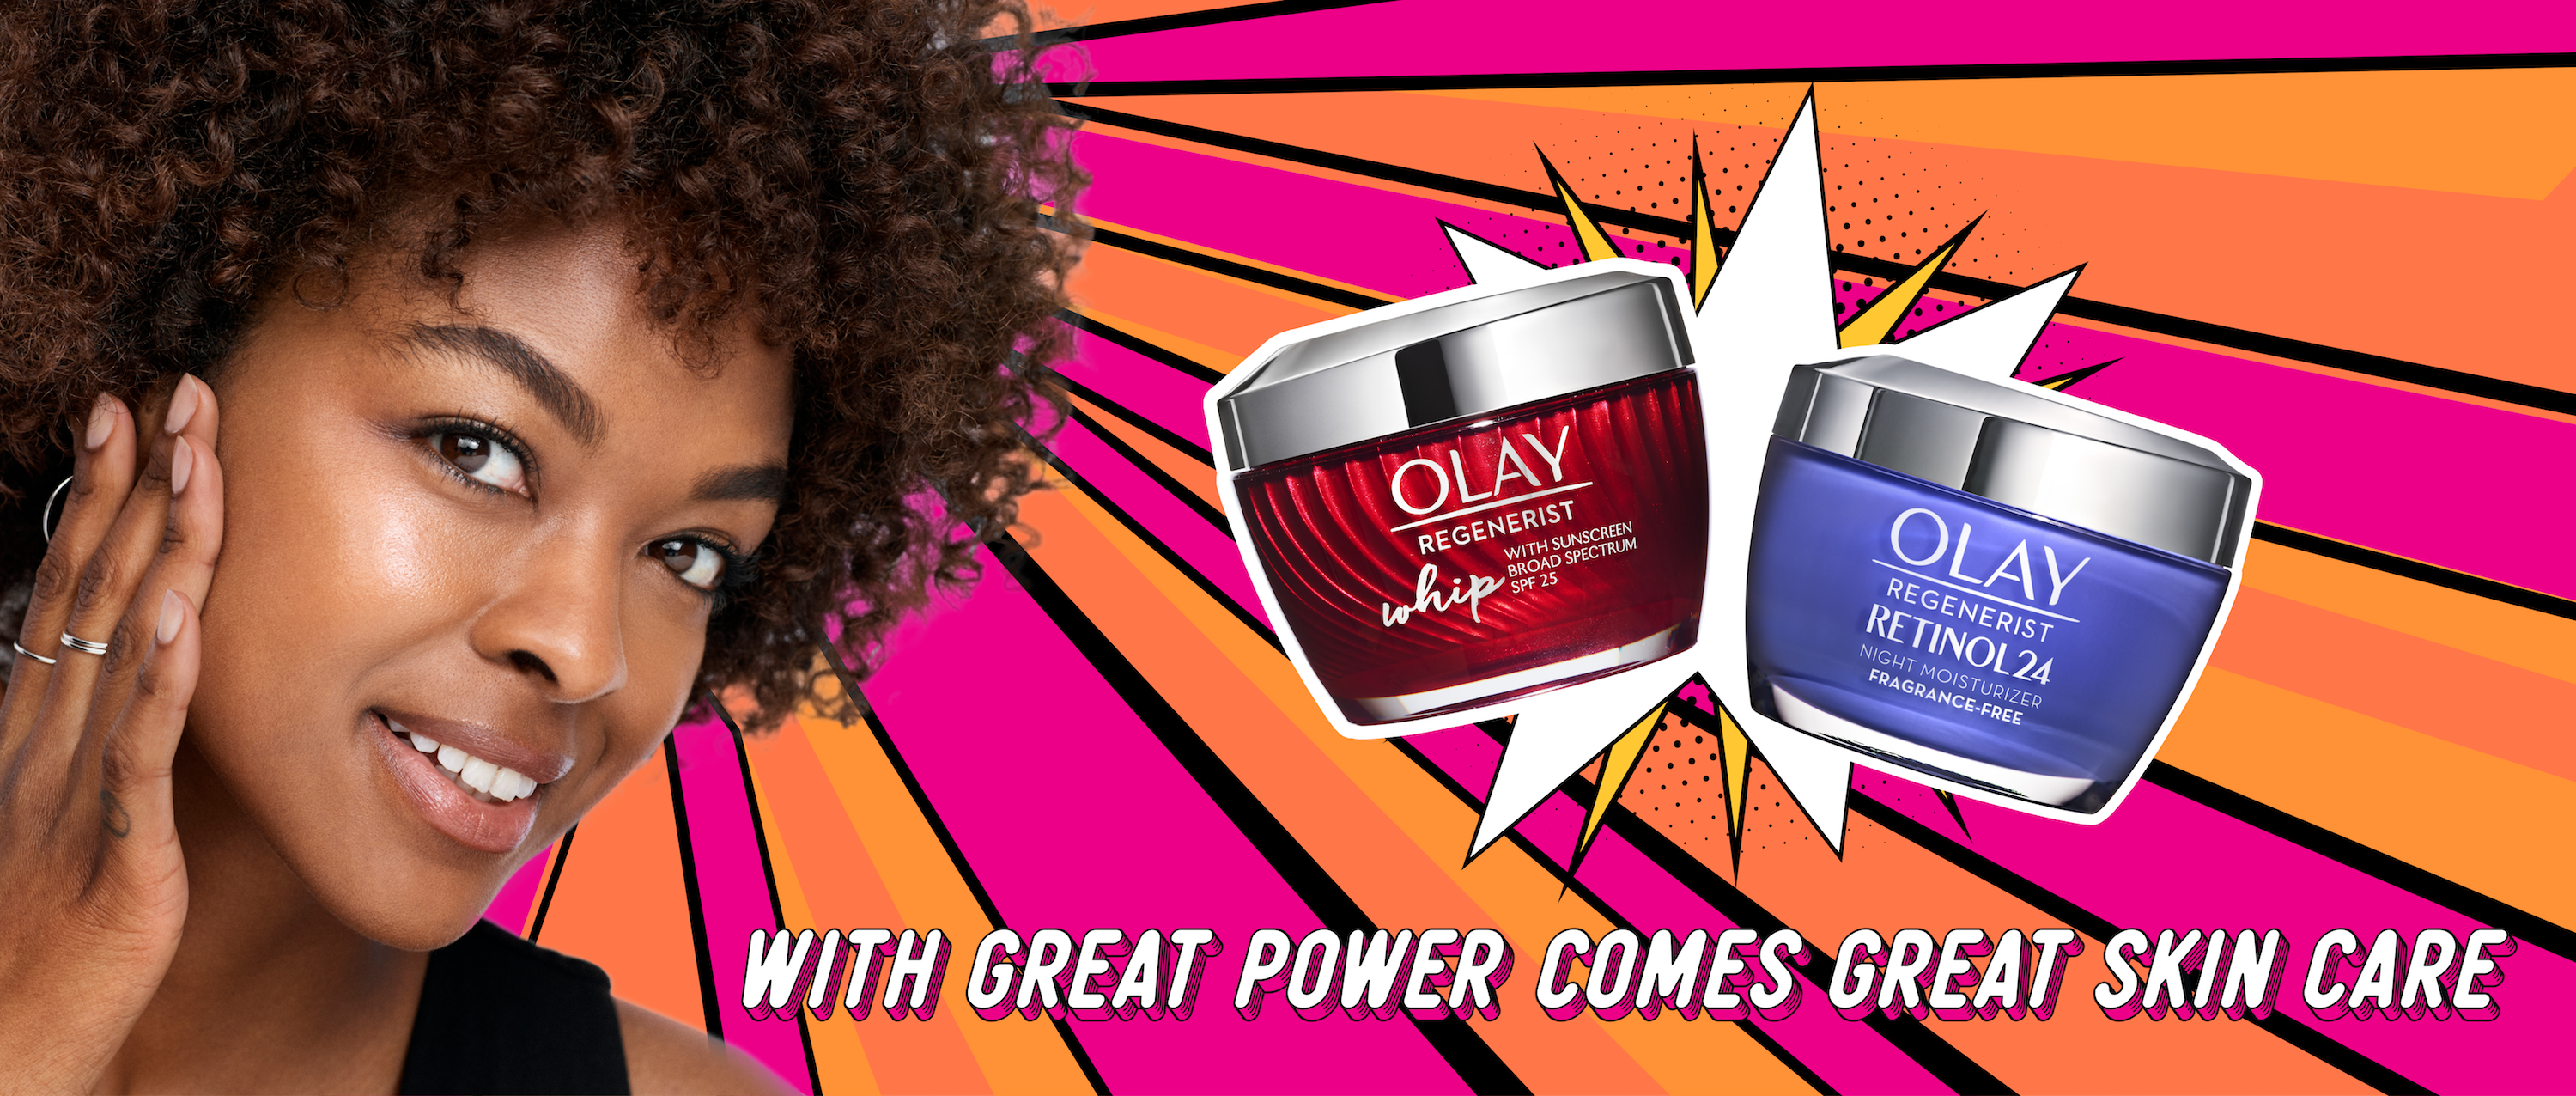 Homepage banner - Power couples campaign:  With great power comes great skin care.